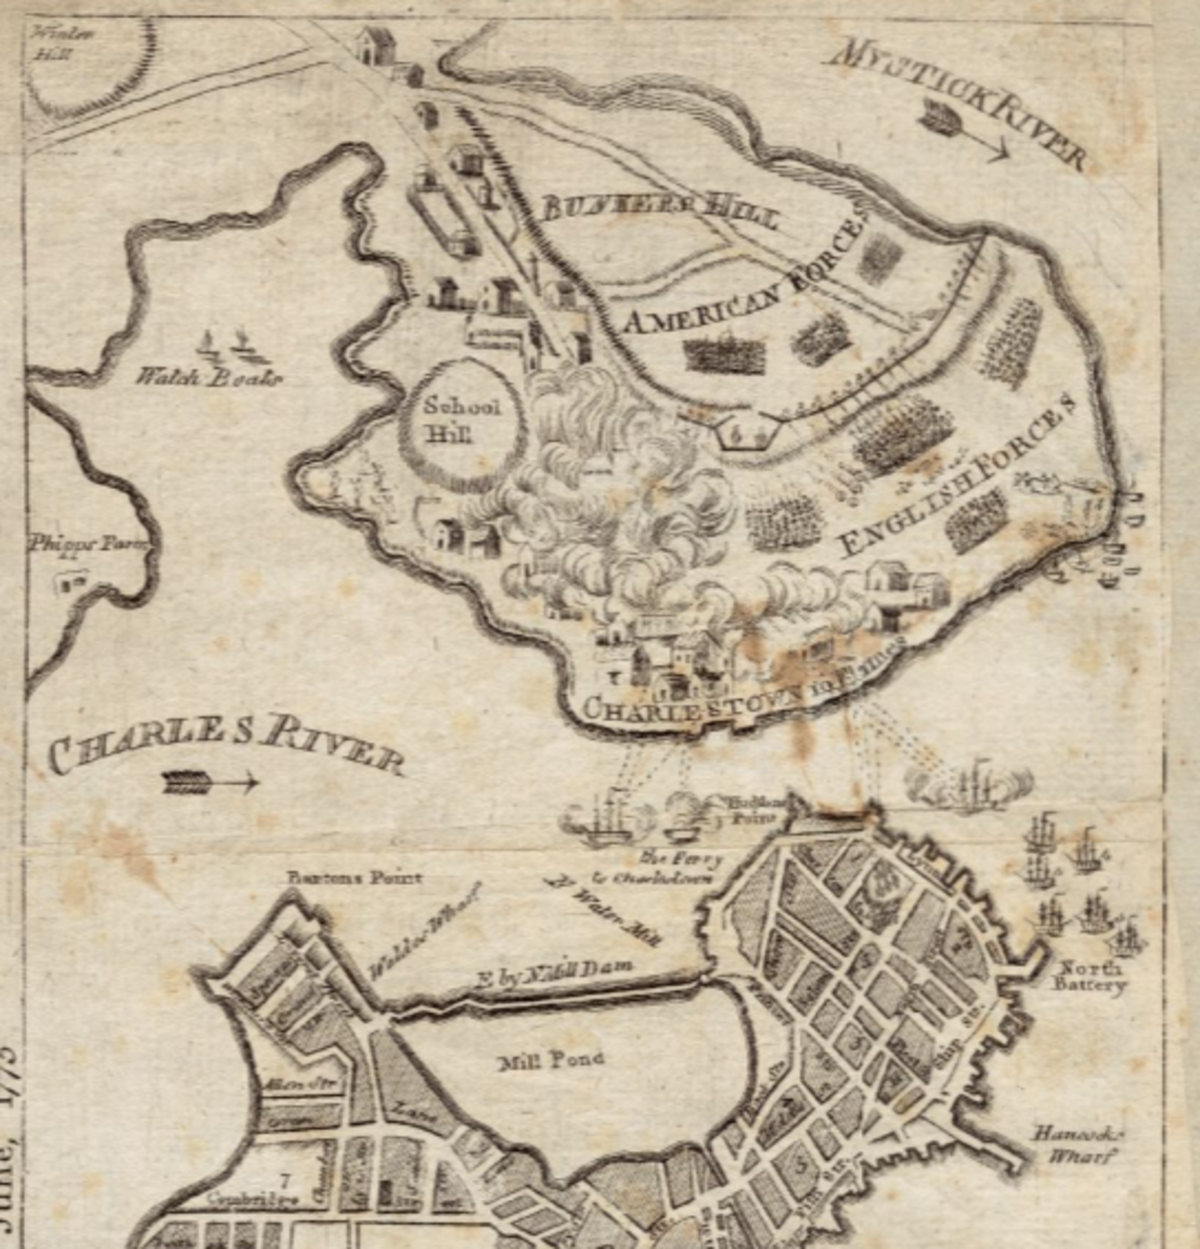 A 17th century map depicting Charlestown and Boston after the Battle of Bunker Hill in 1775.